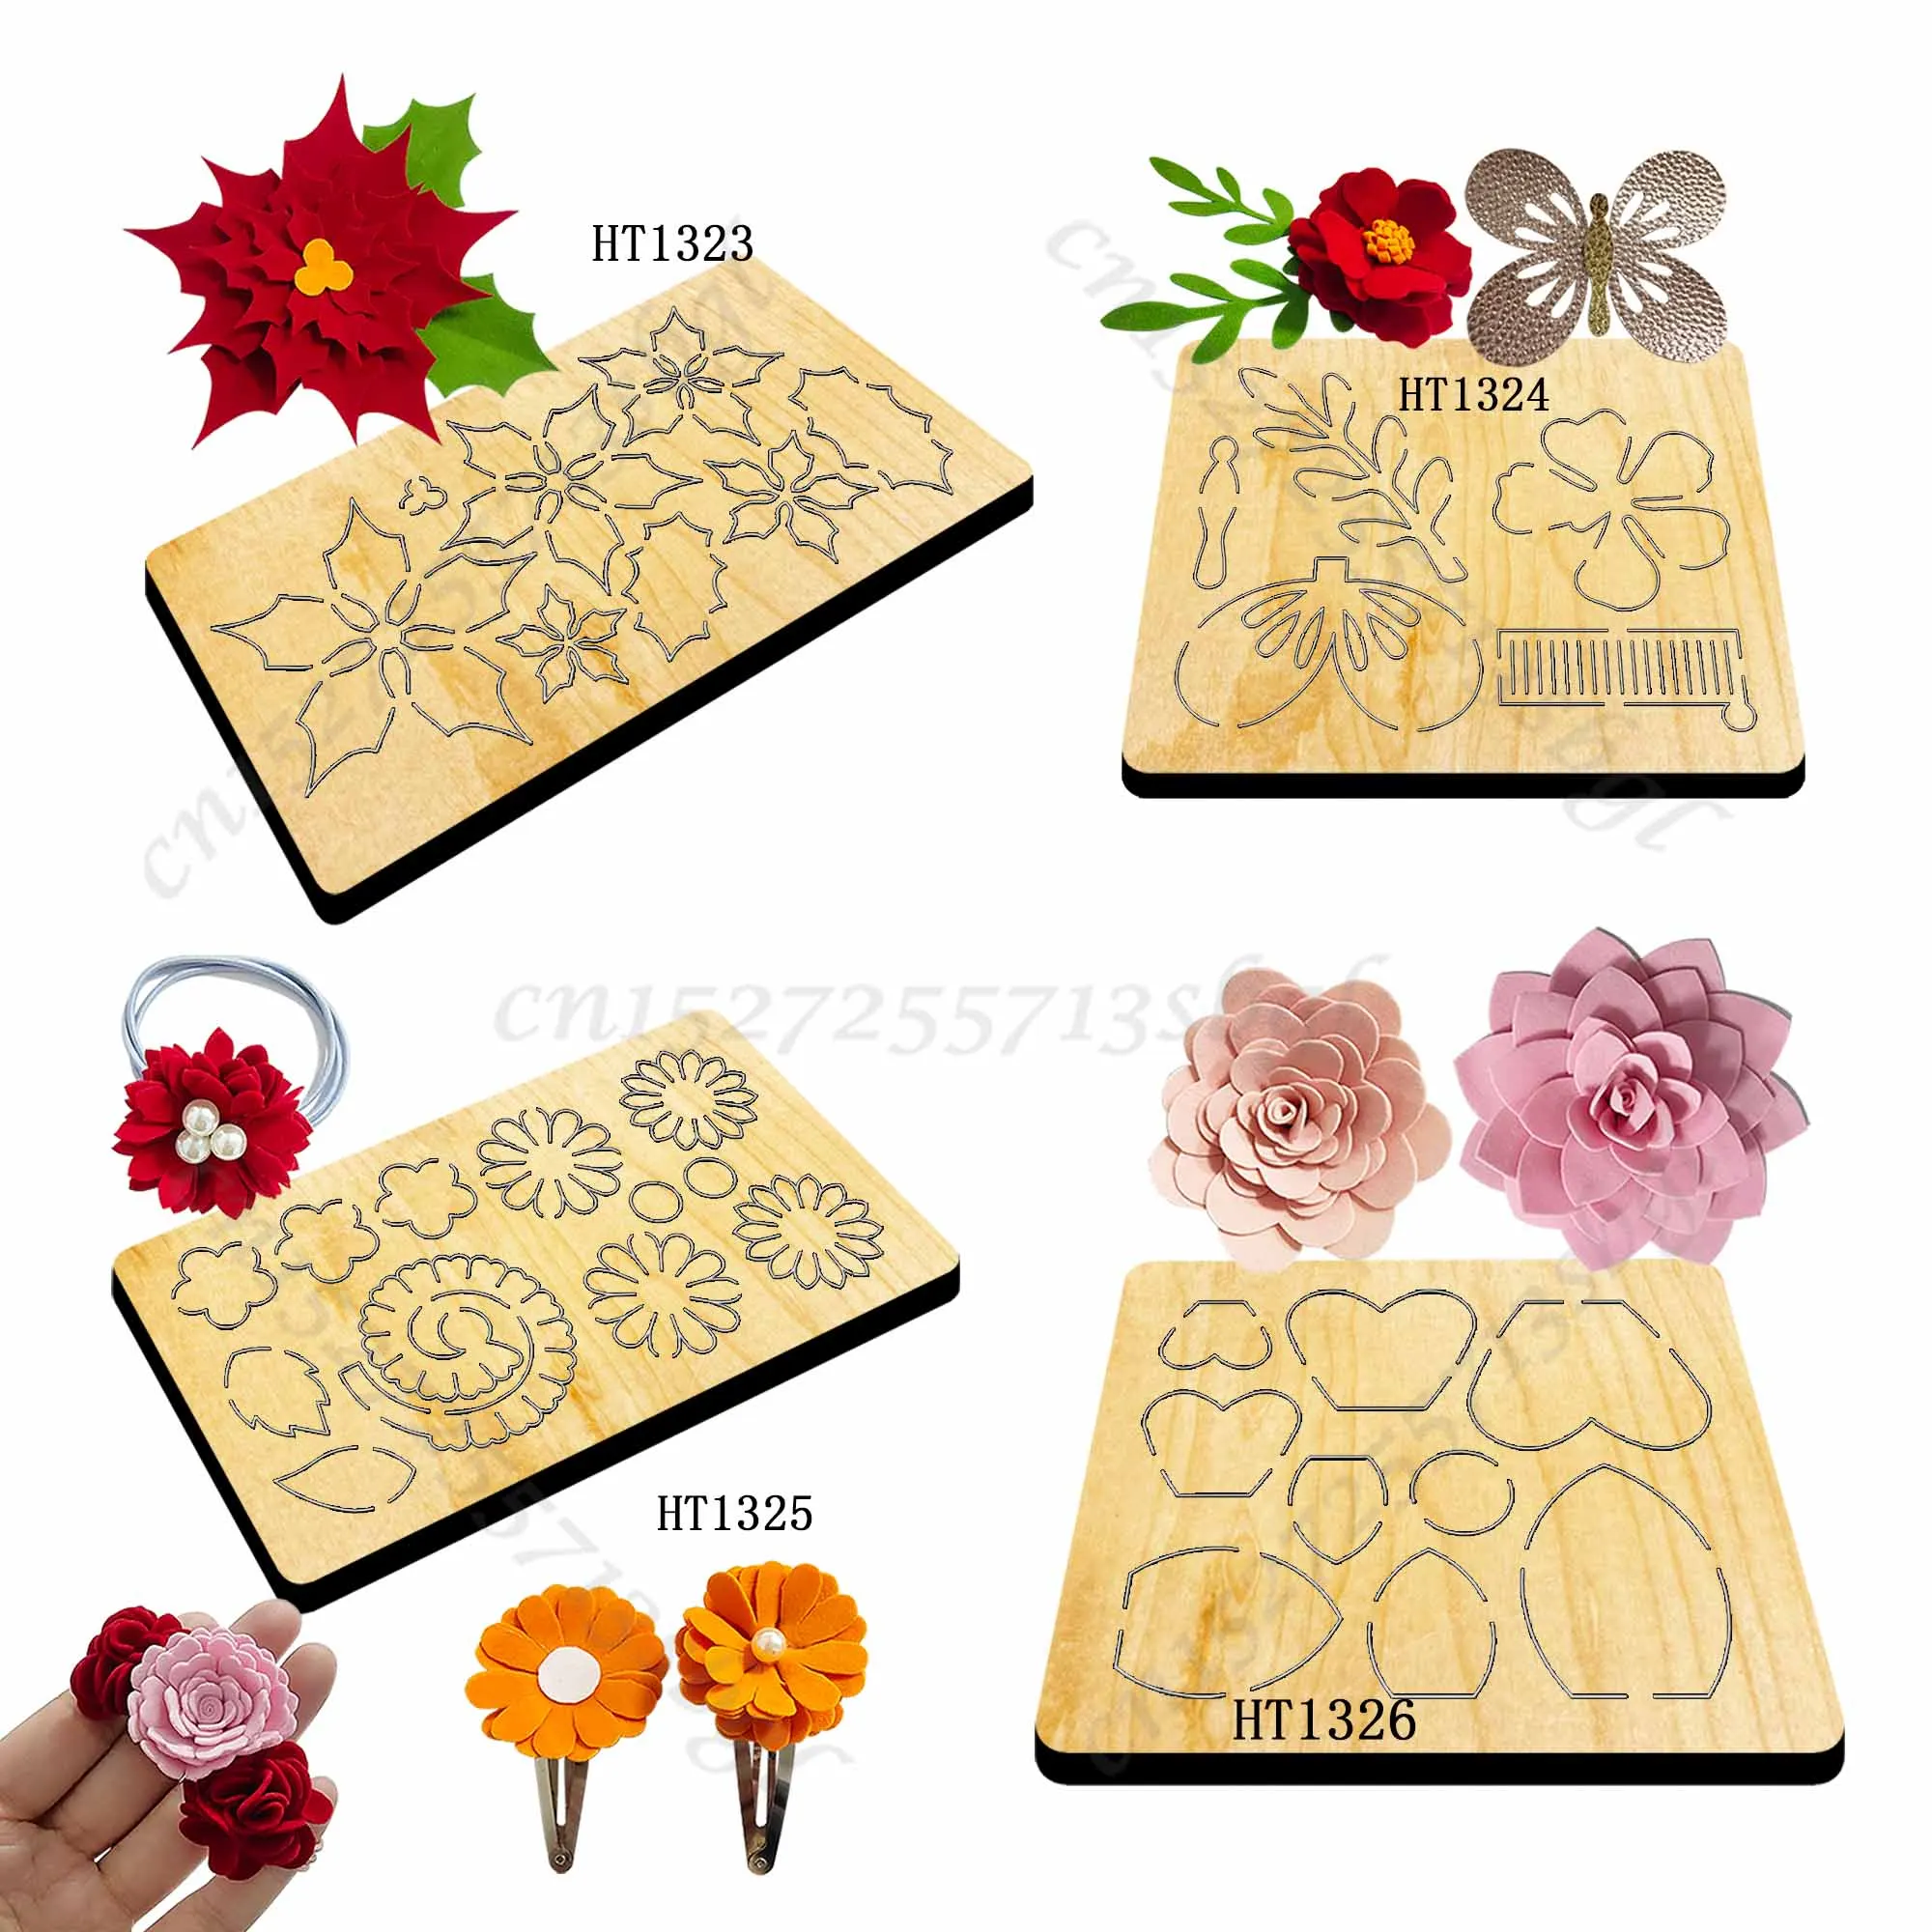 

FlowerCutting dies - New Die Cutting And Wooden Mold,HT1323 - HT1326 Suitable For Common Die Cutting Machines On The Market.